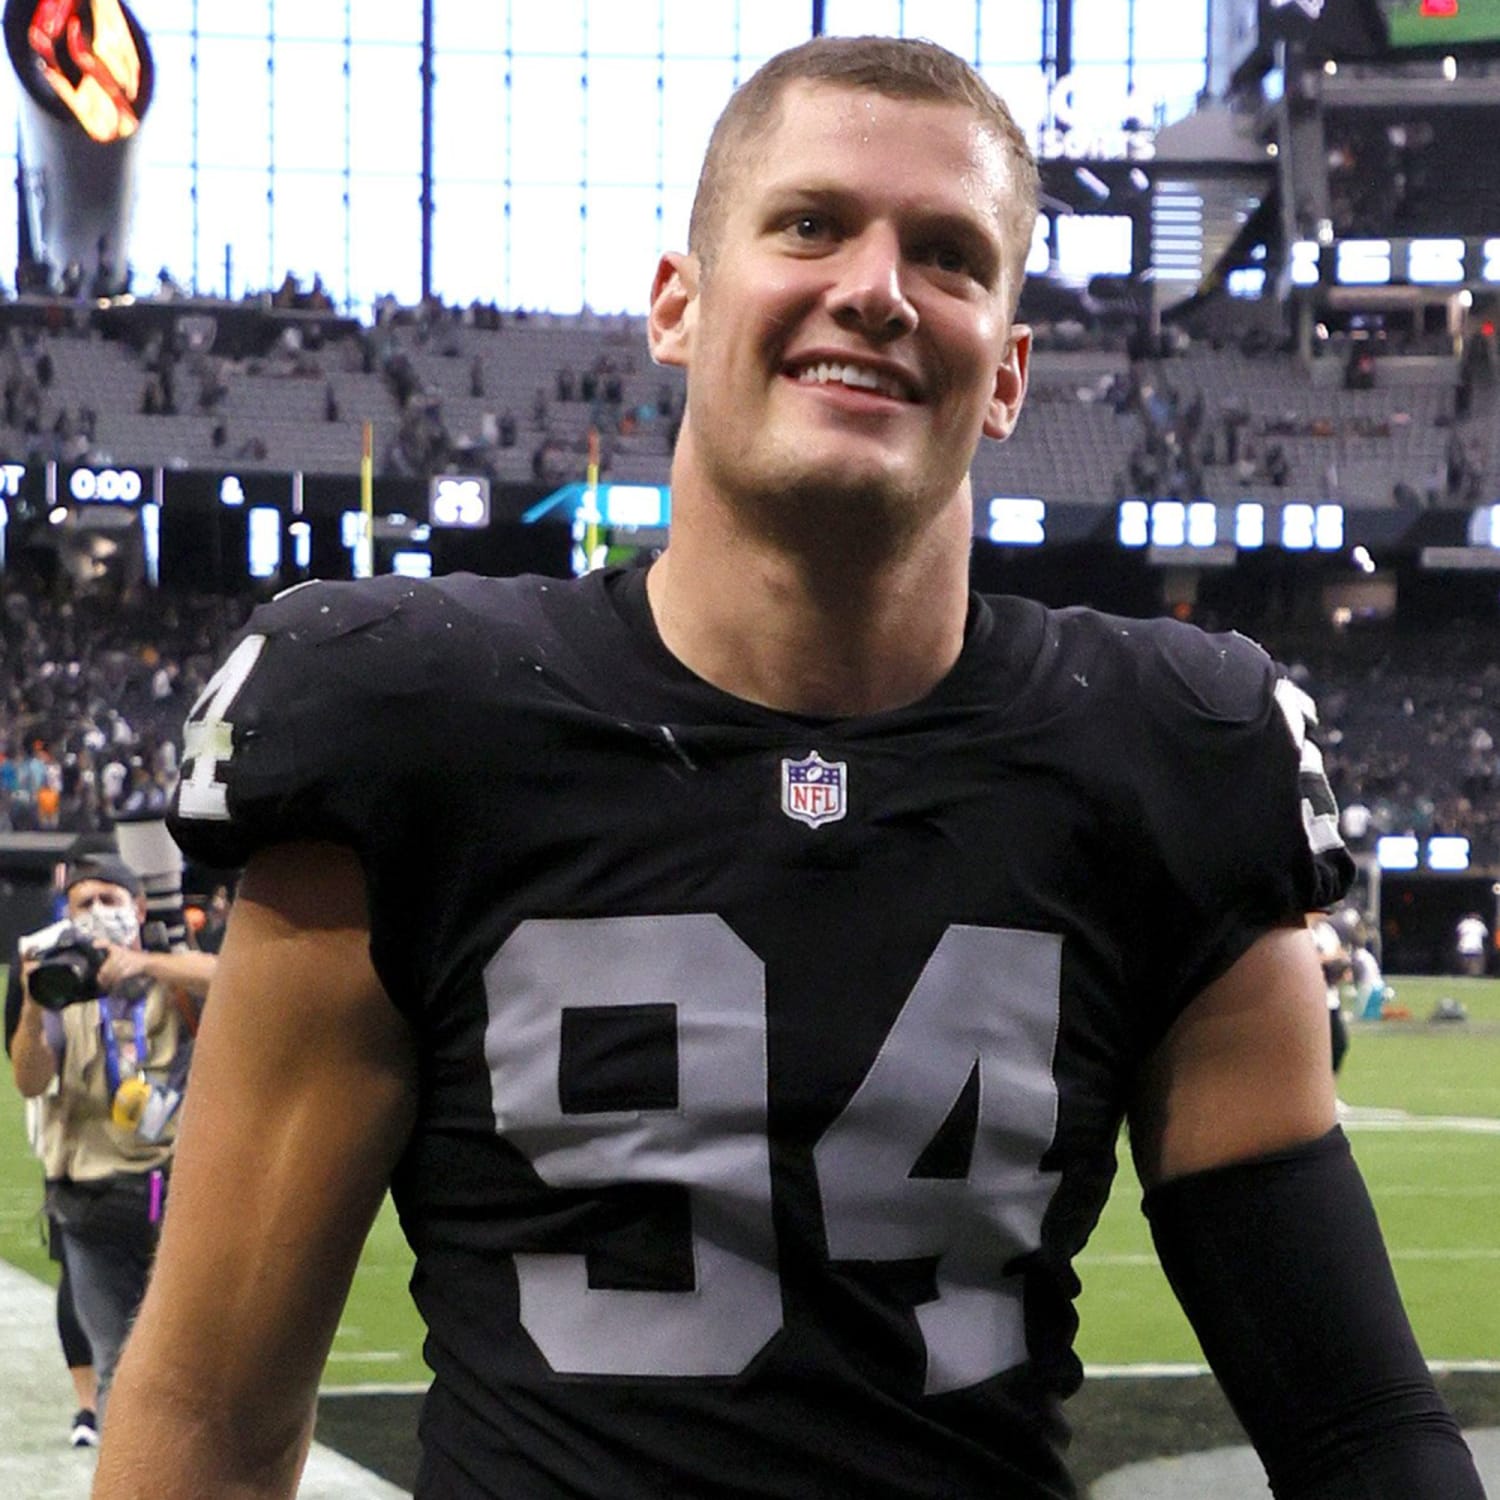 NFL star Carl Nassib reveals he's dating someone 'awesome'